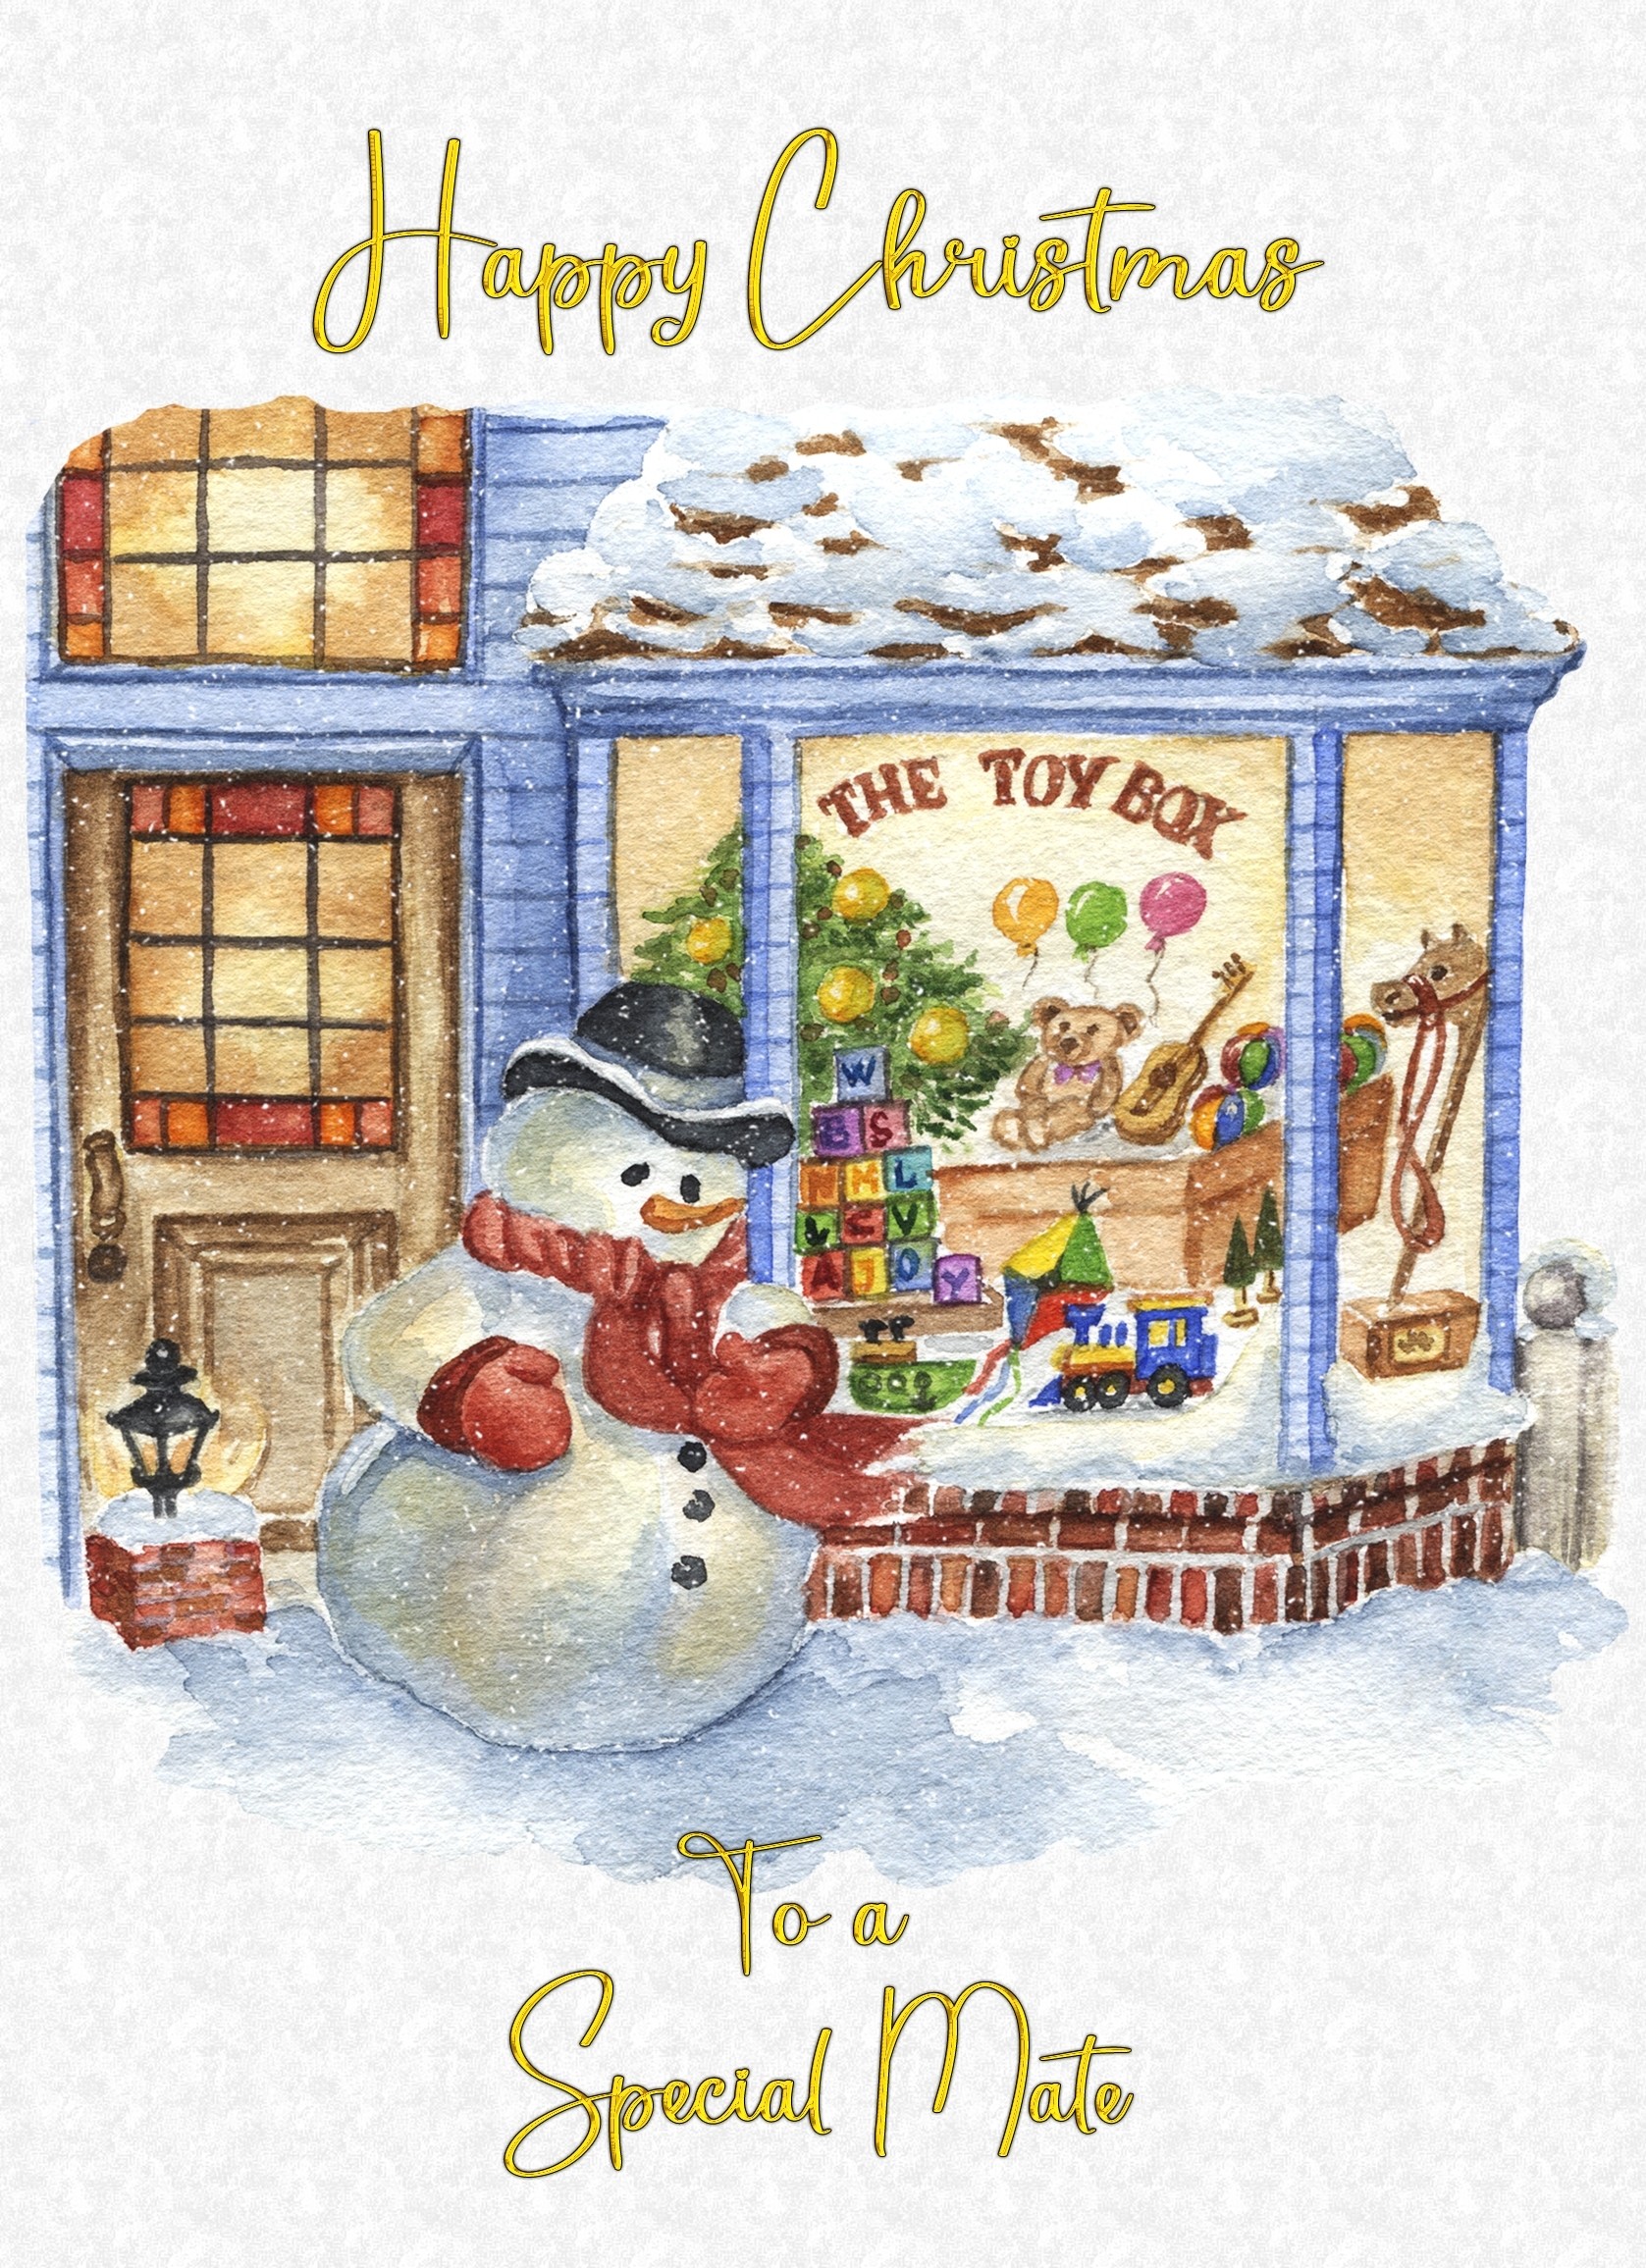 Christmas Card For Mate (White Snowman)